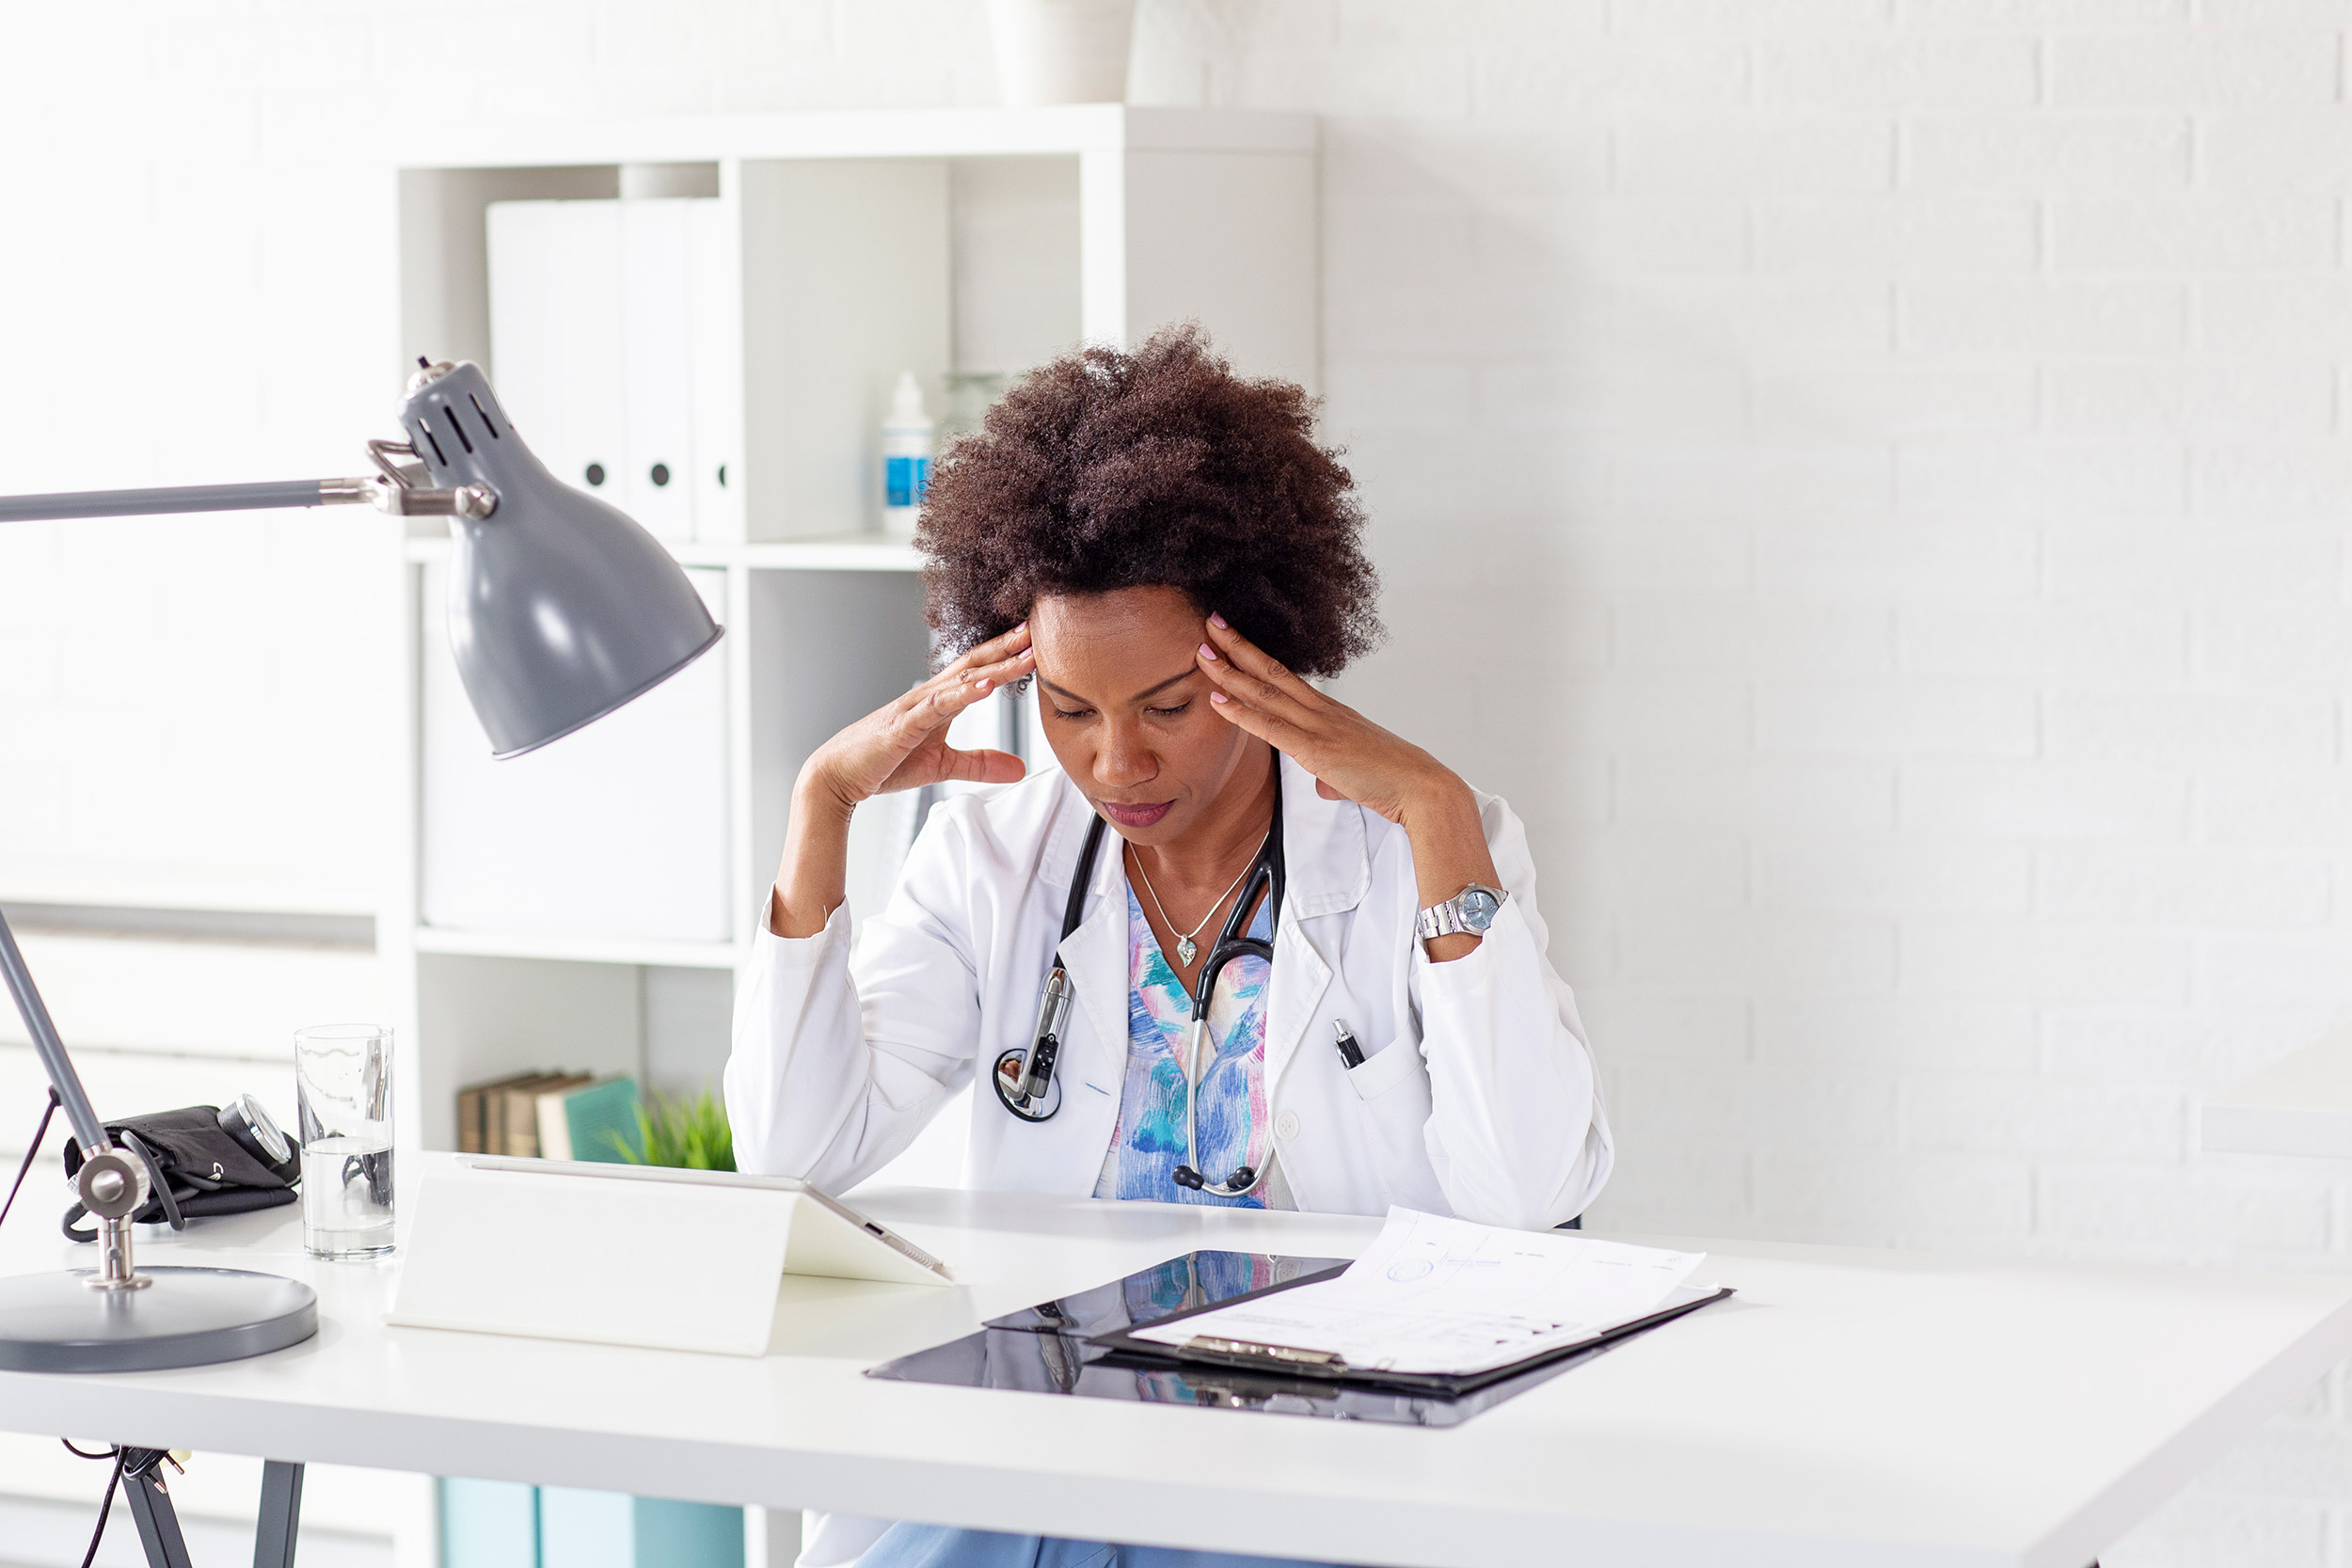 Burnout is an often unrecognized problem in the physician community.